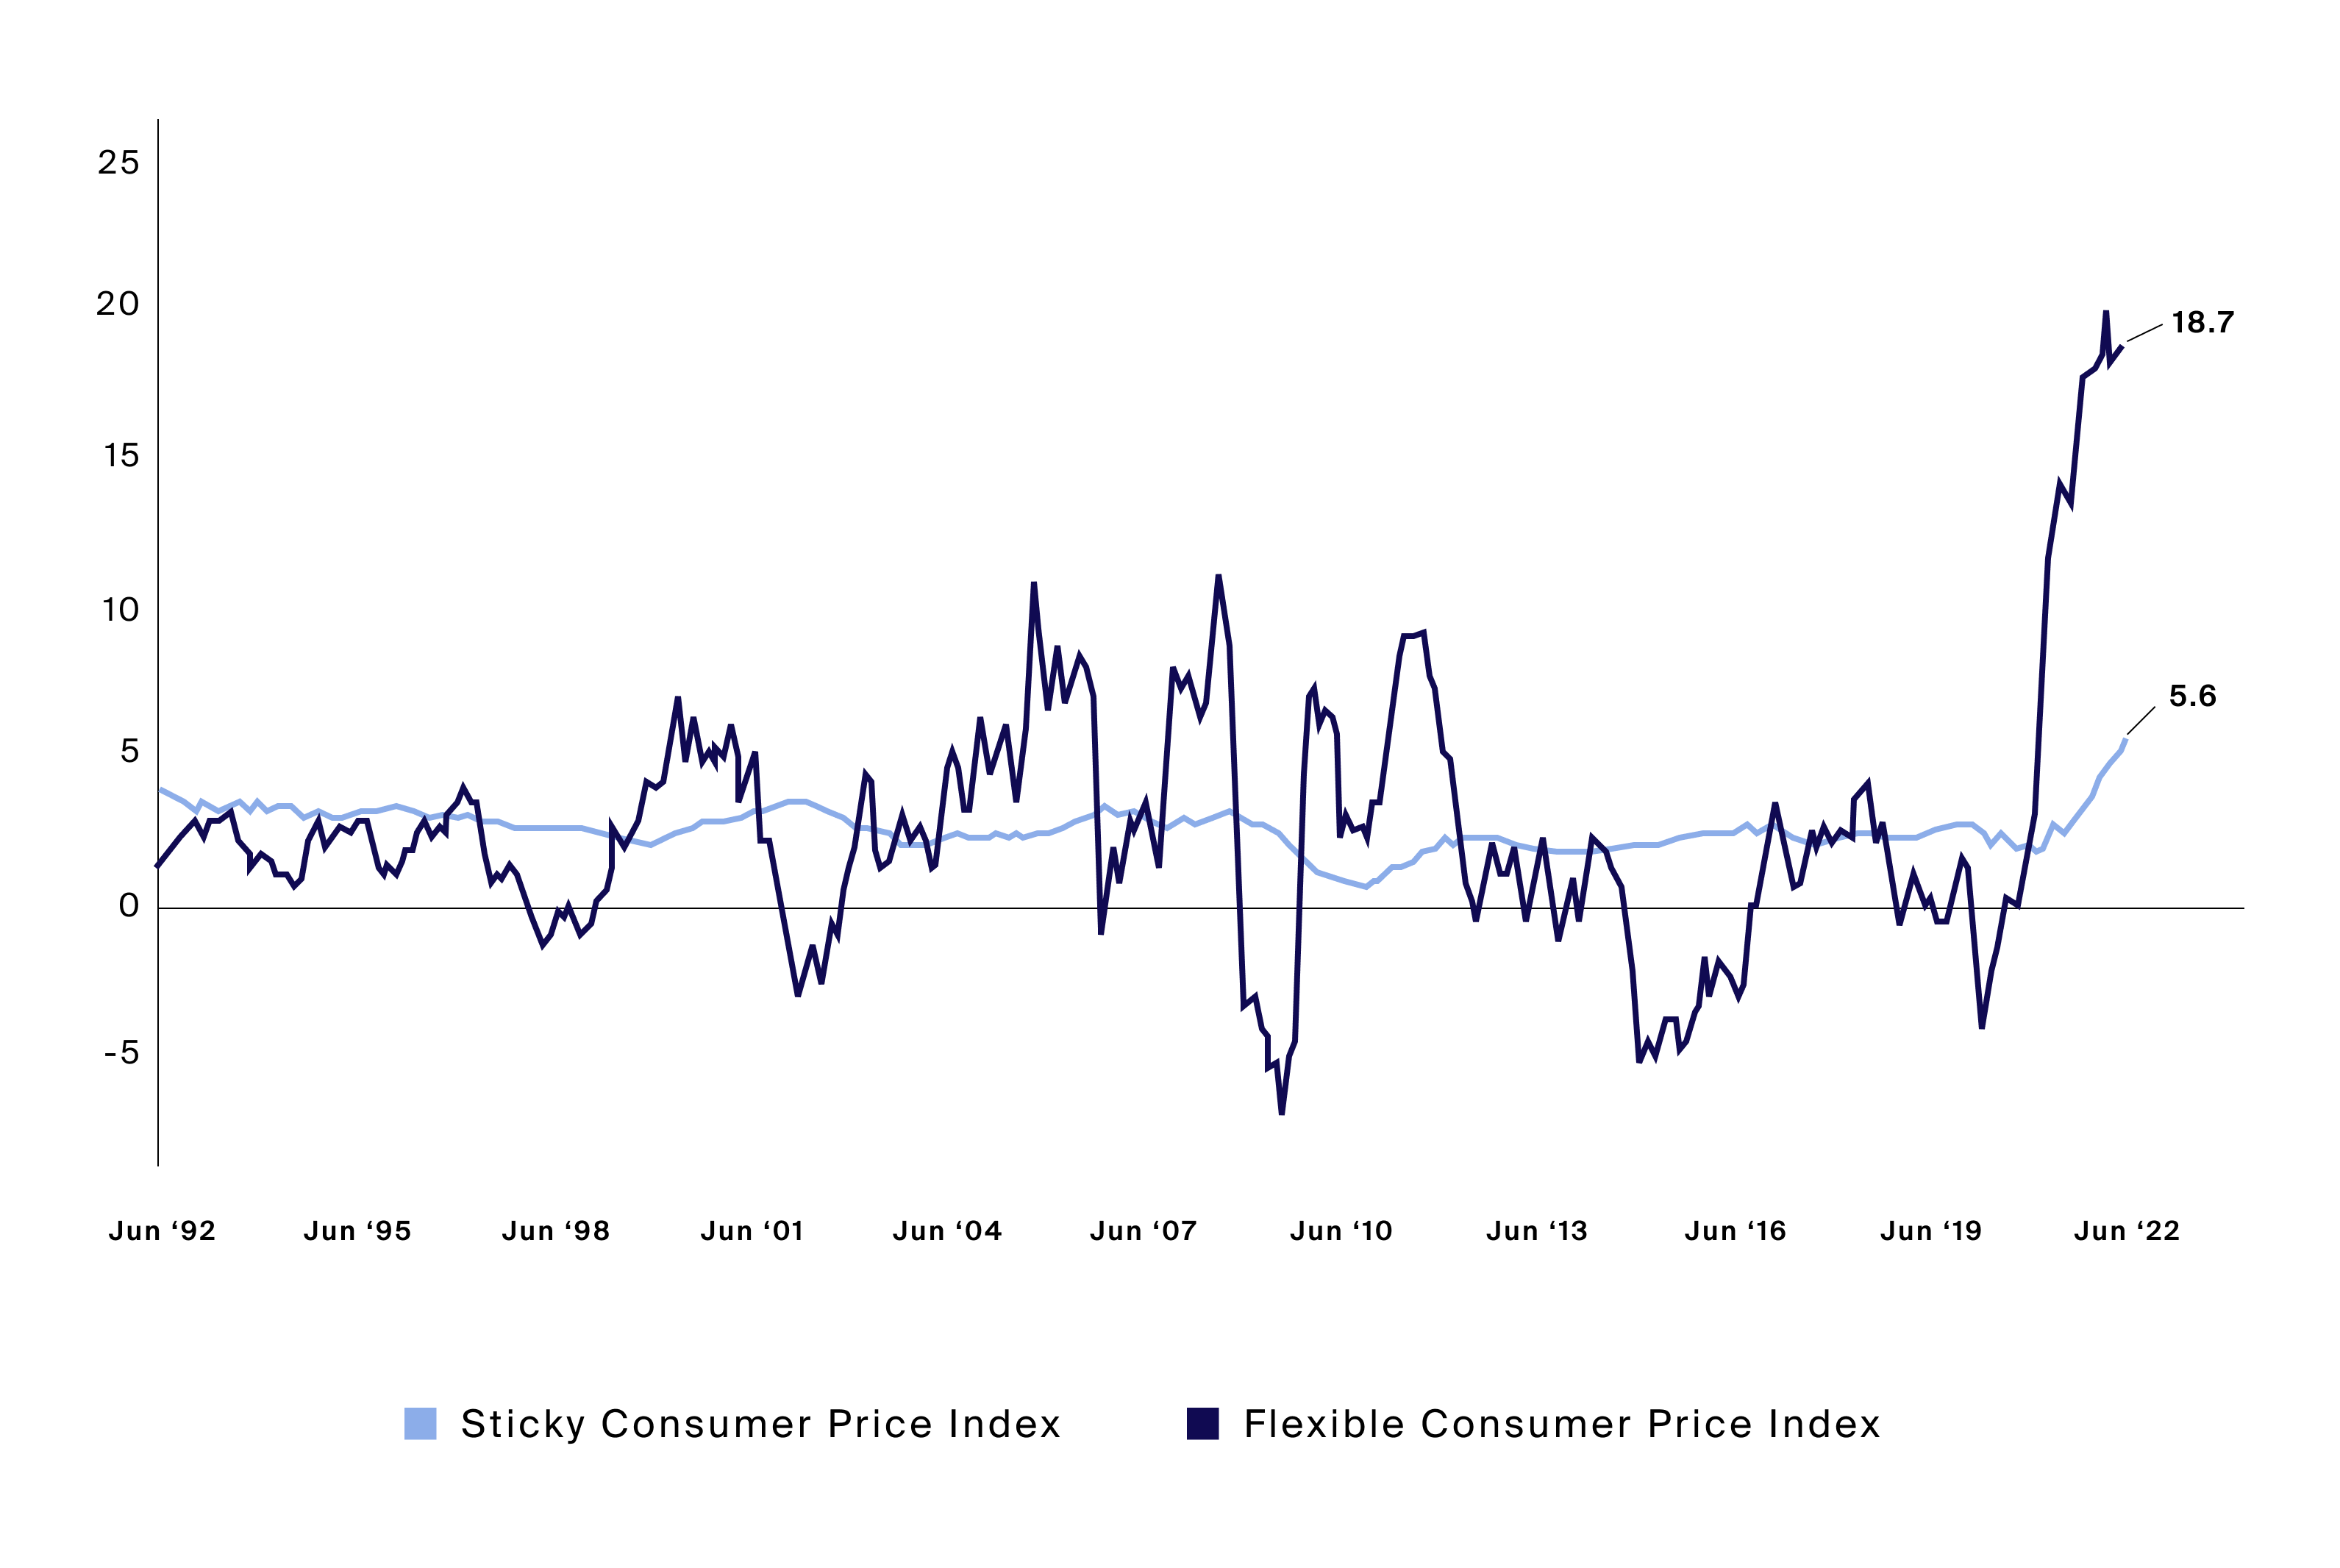 Increasingly the drivers of inflation as measured by CPI are “sticky” components – goods and services that change price relatively infrequently